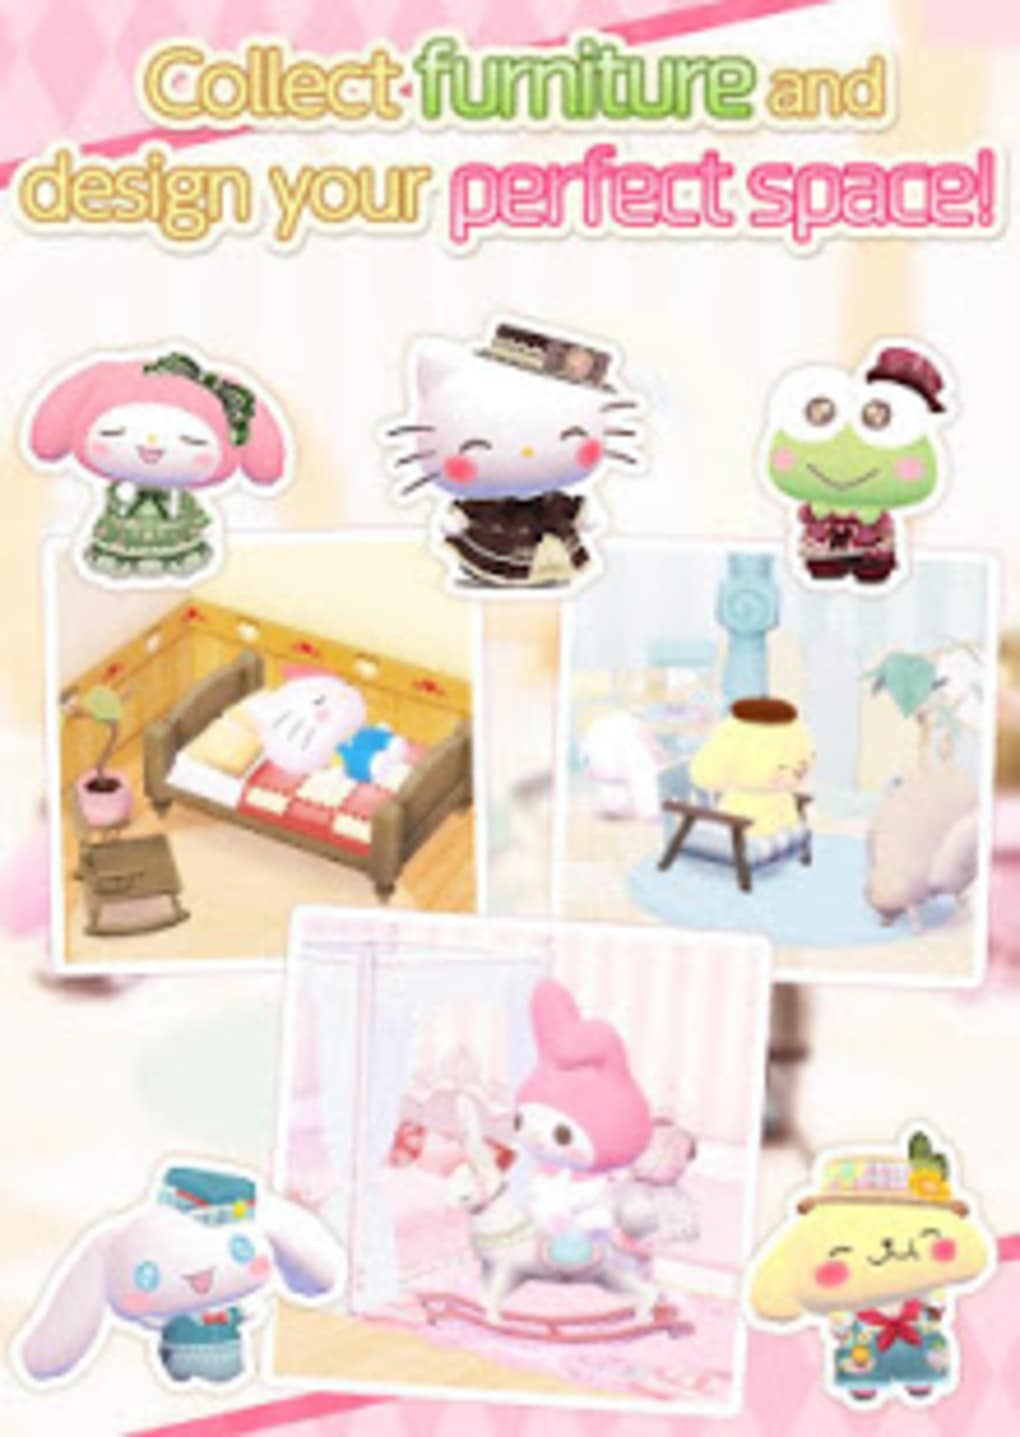 Hello Kitty World - Fun Game - APK Download for Android